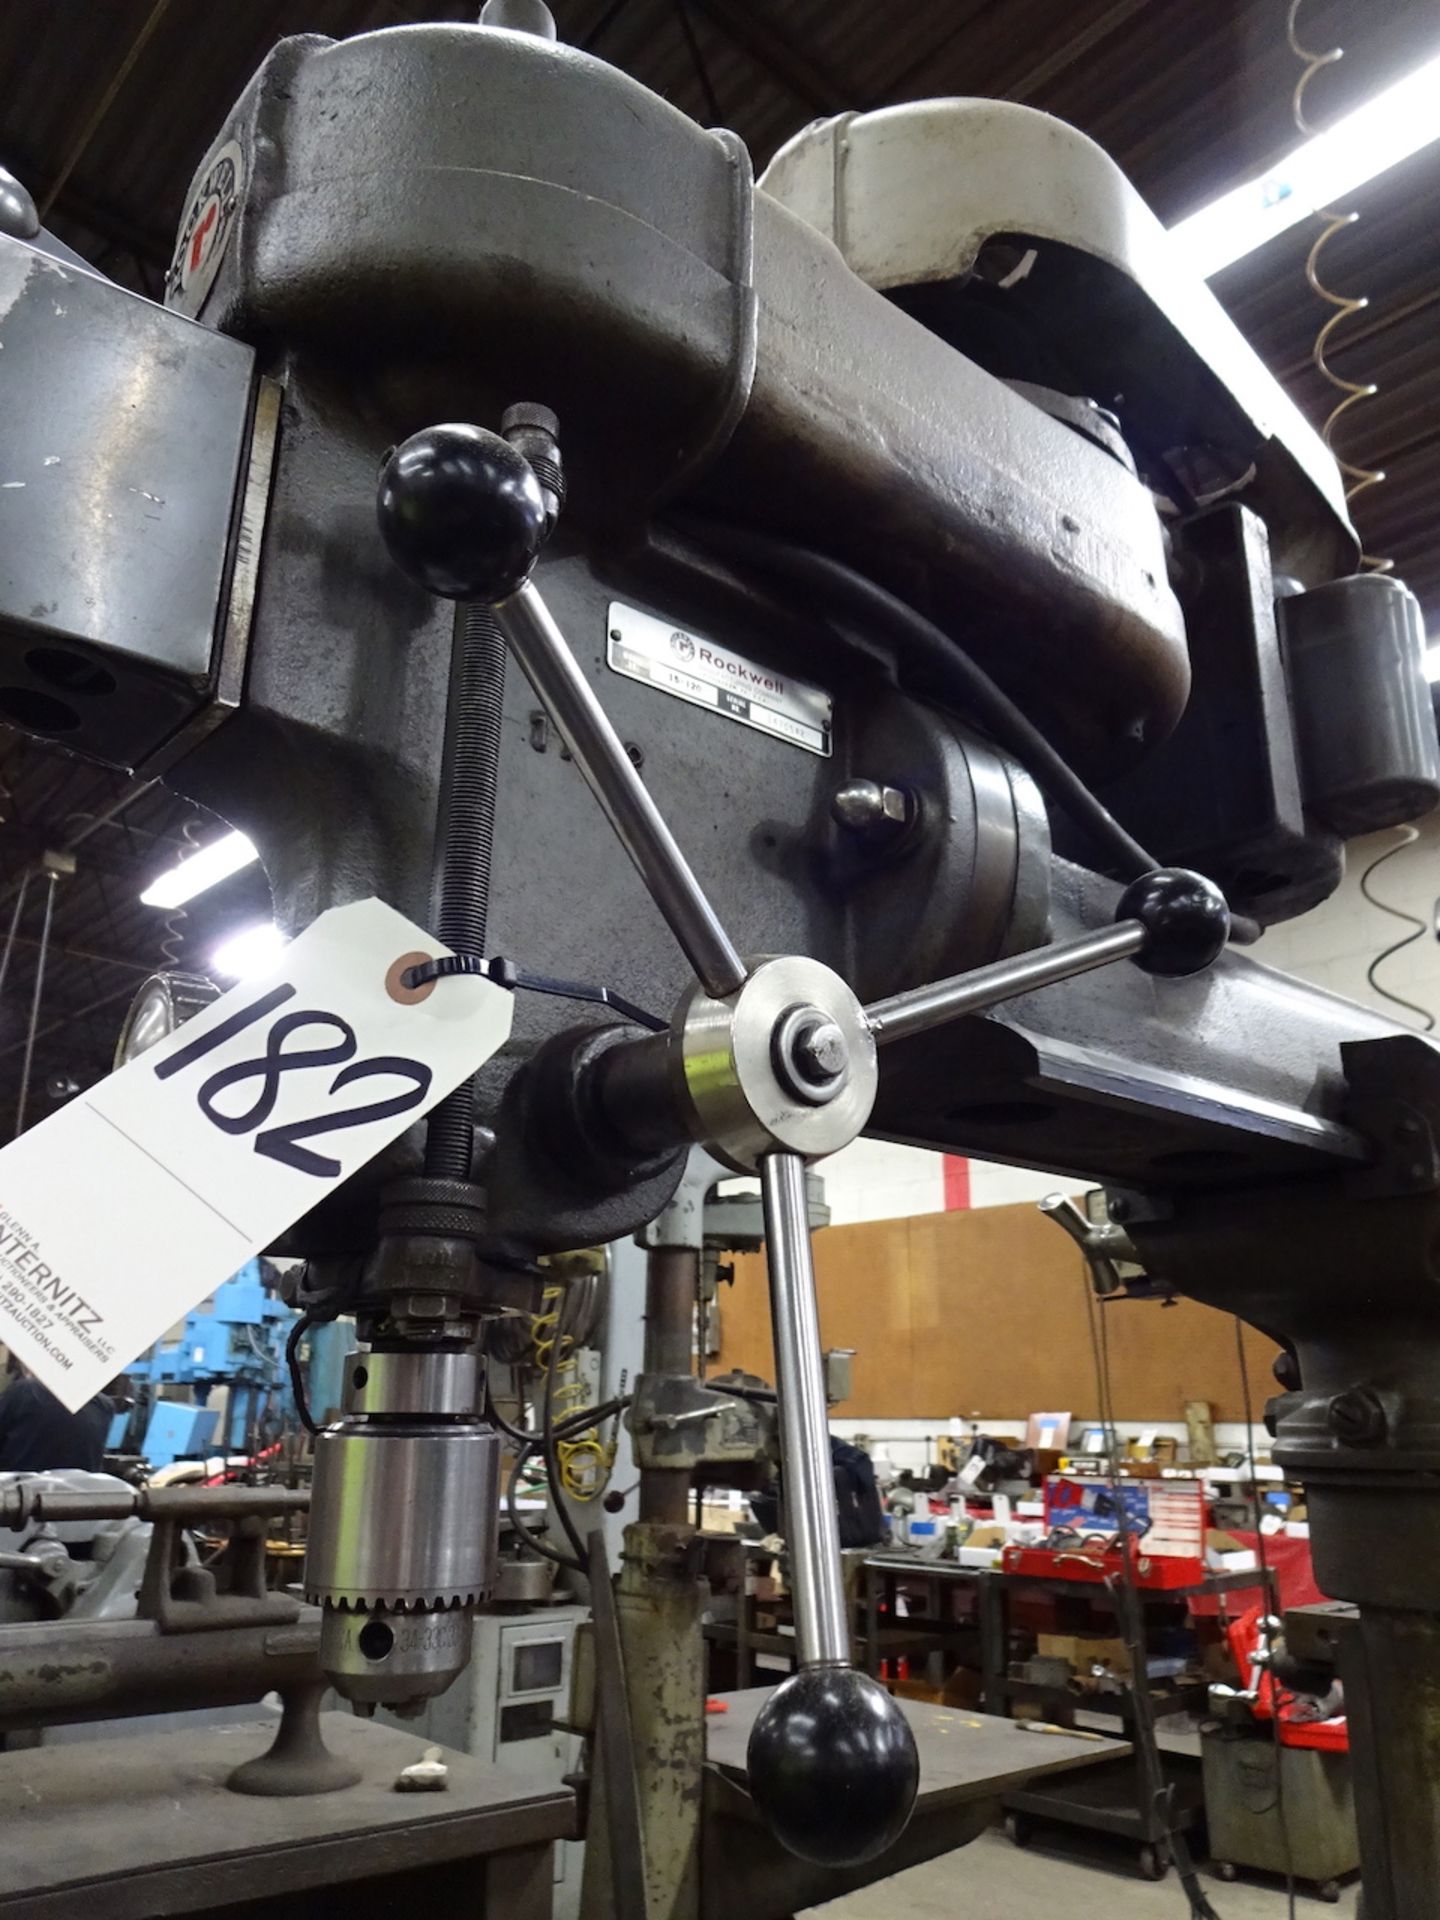 Rockwell Model 15-120 Radial Arm Drill Press, S/N 1470542, 1/2 HP, 26 in. x 18 in. T-Slot Table - Image 5 of 5